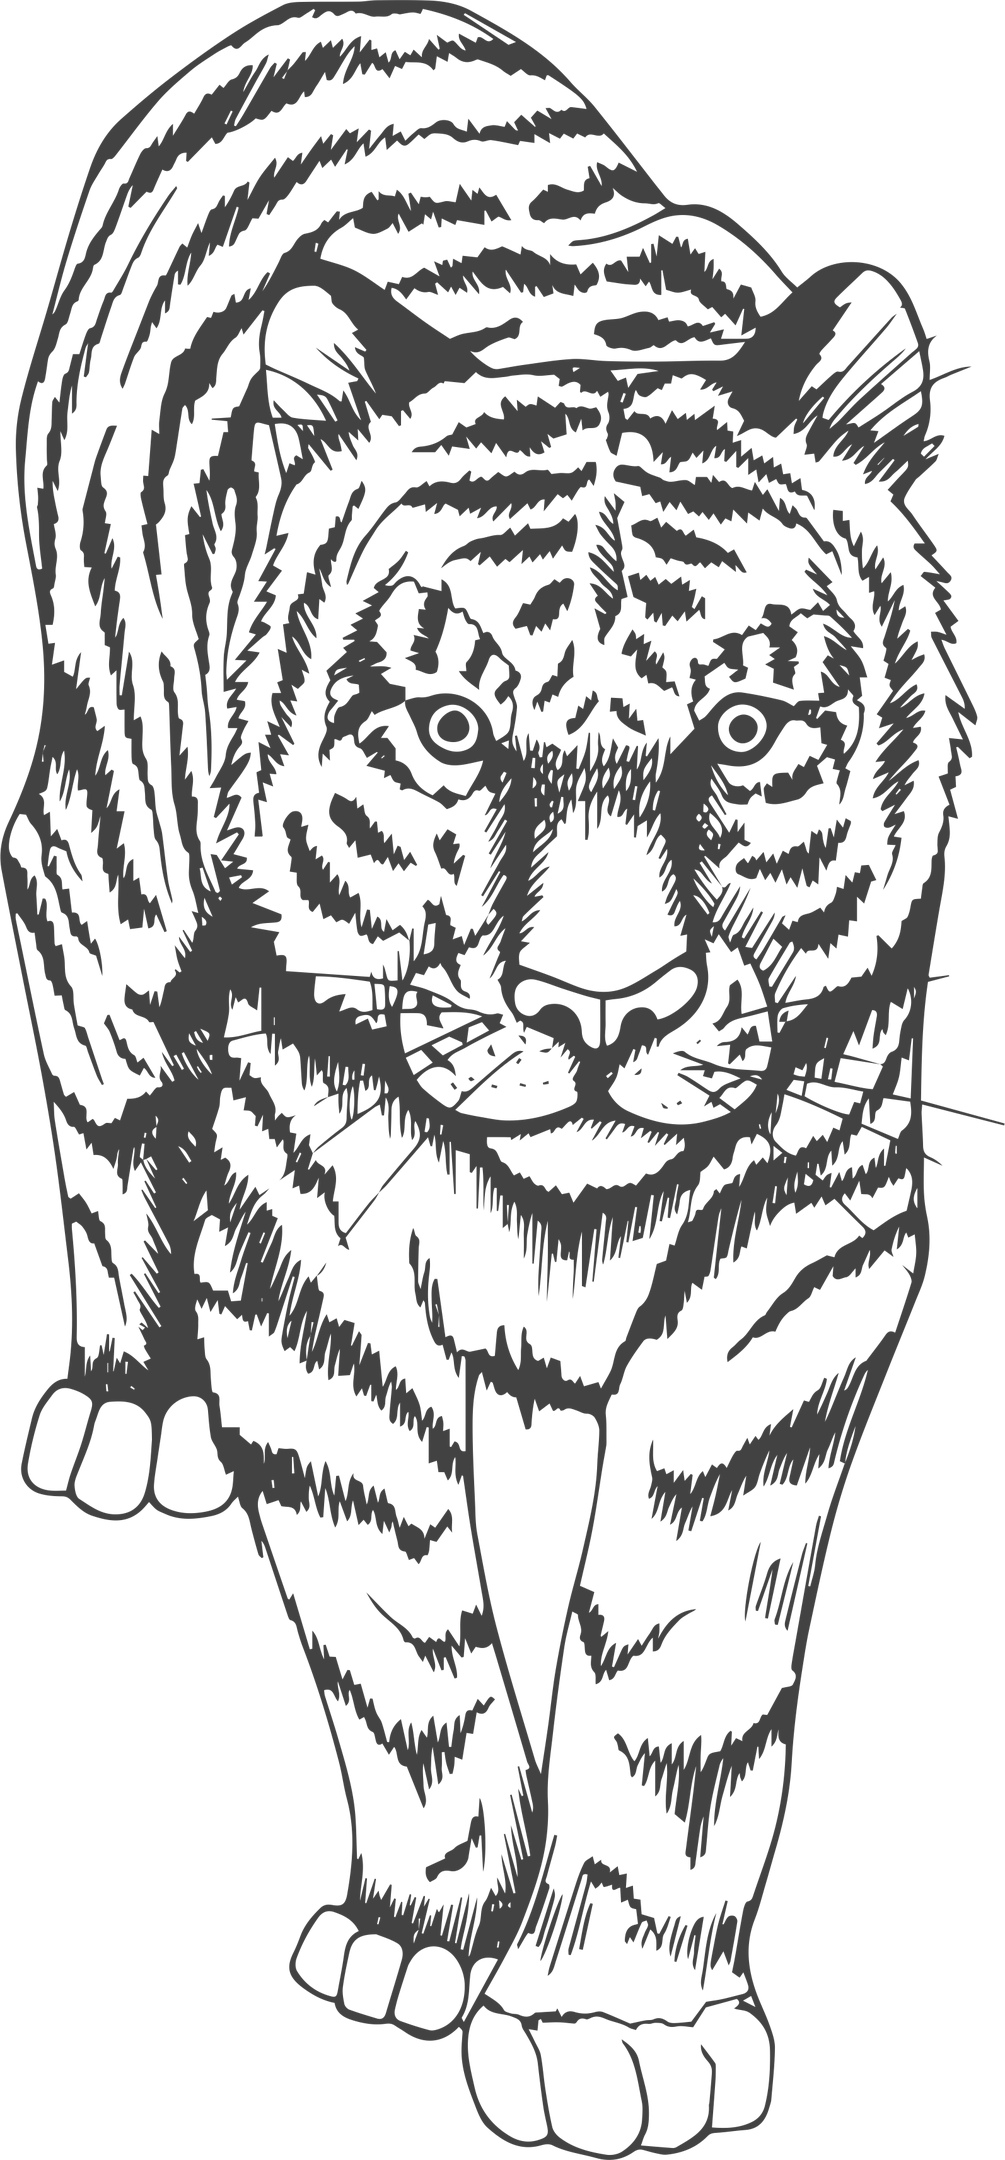 Tiger Art Print Free Vector cdr Download - 3axis.co